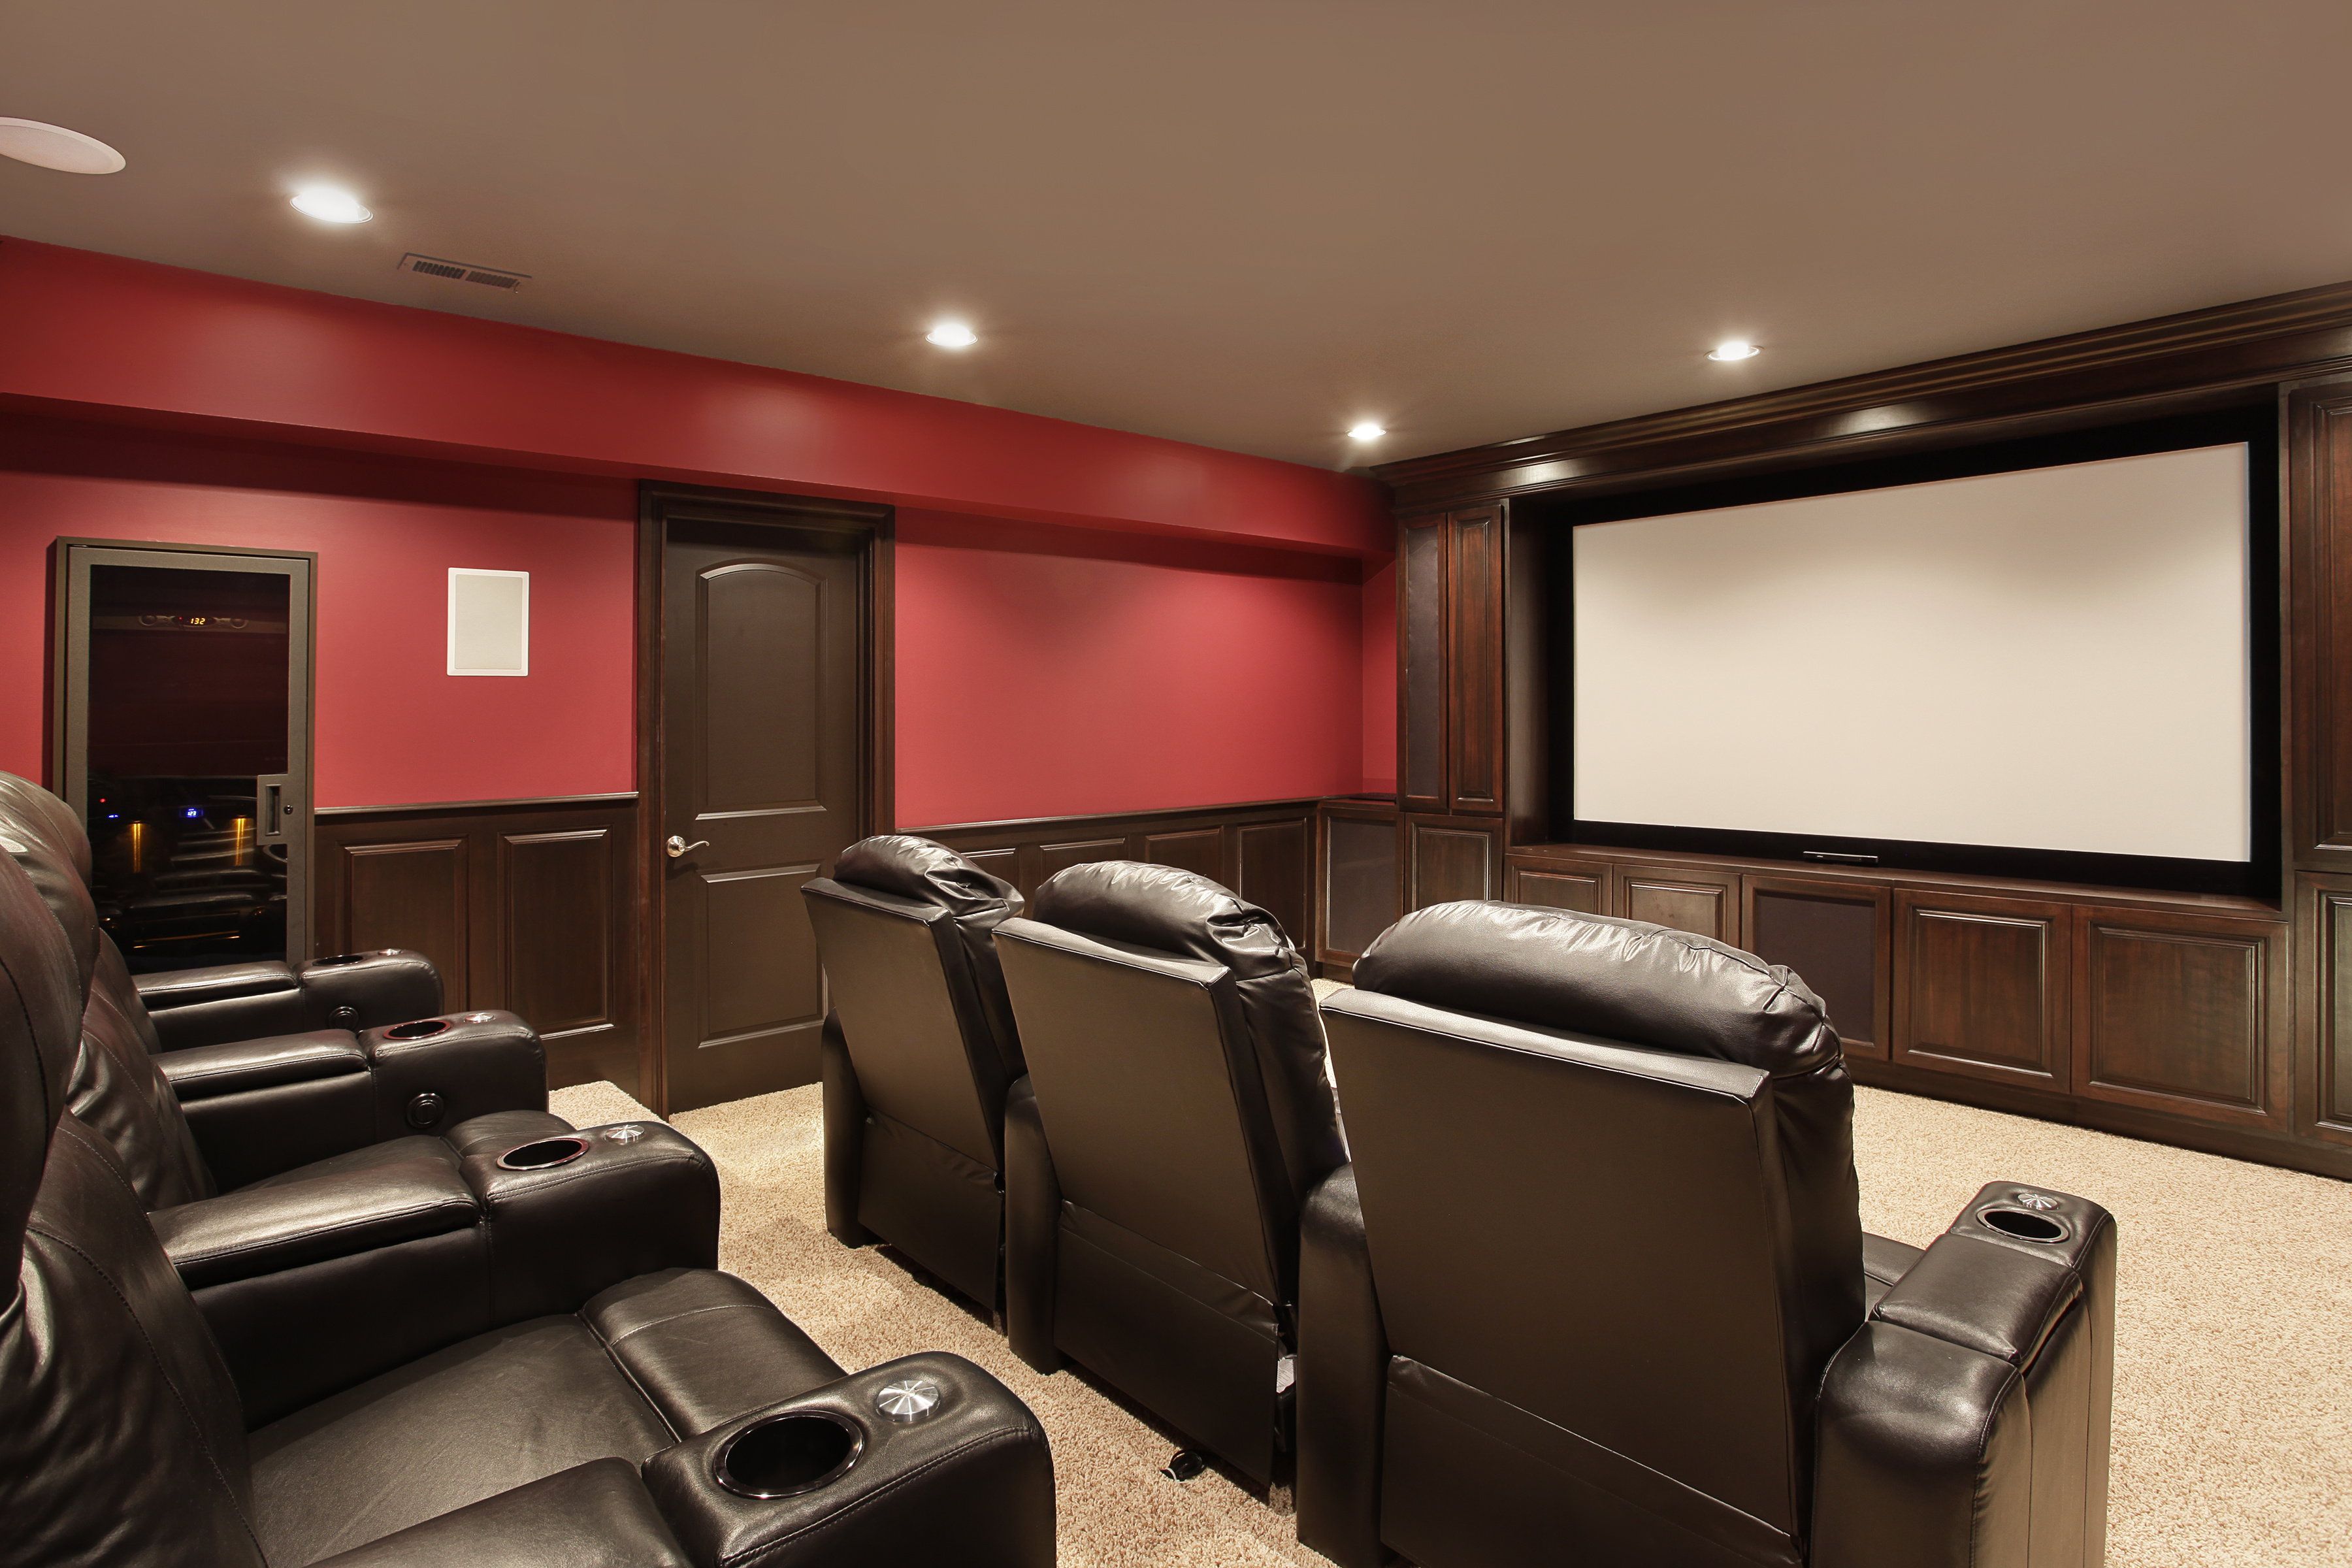 complete home theater with huge seats, movie screen